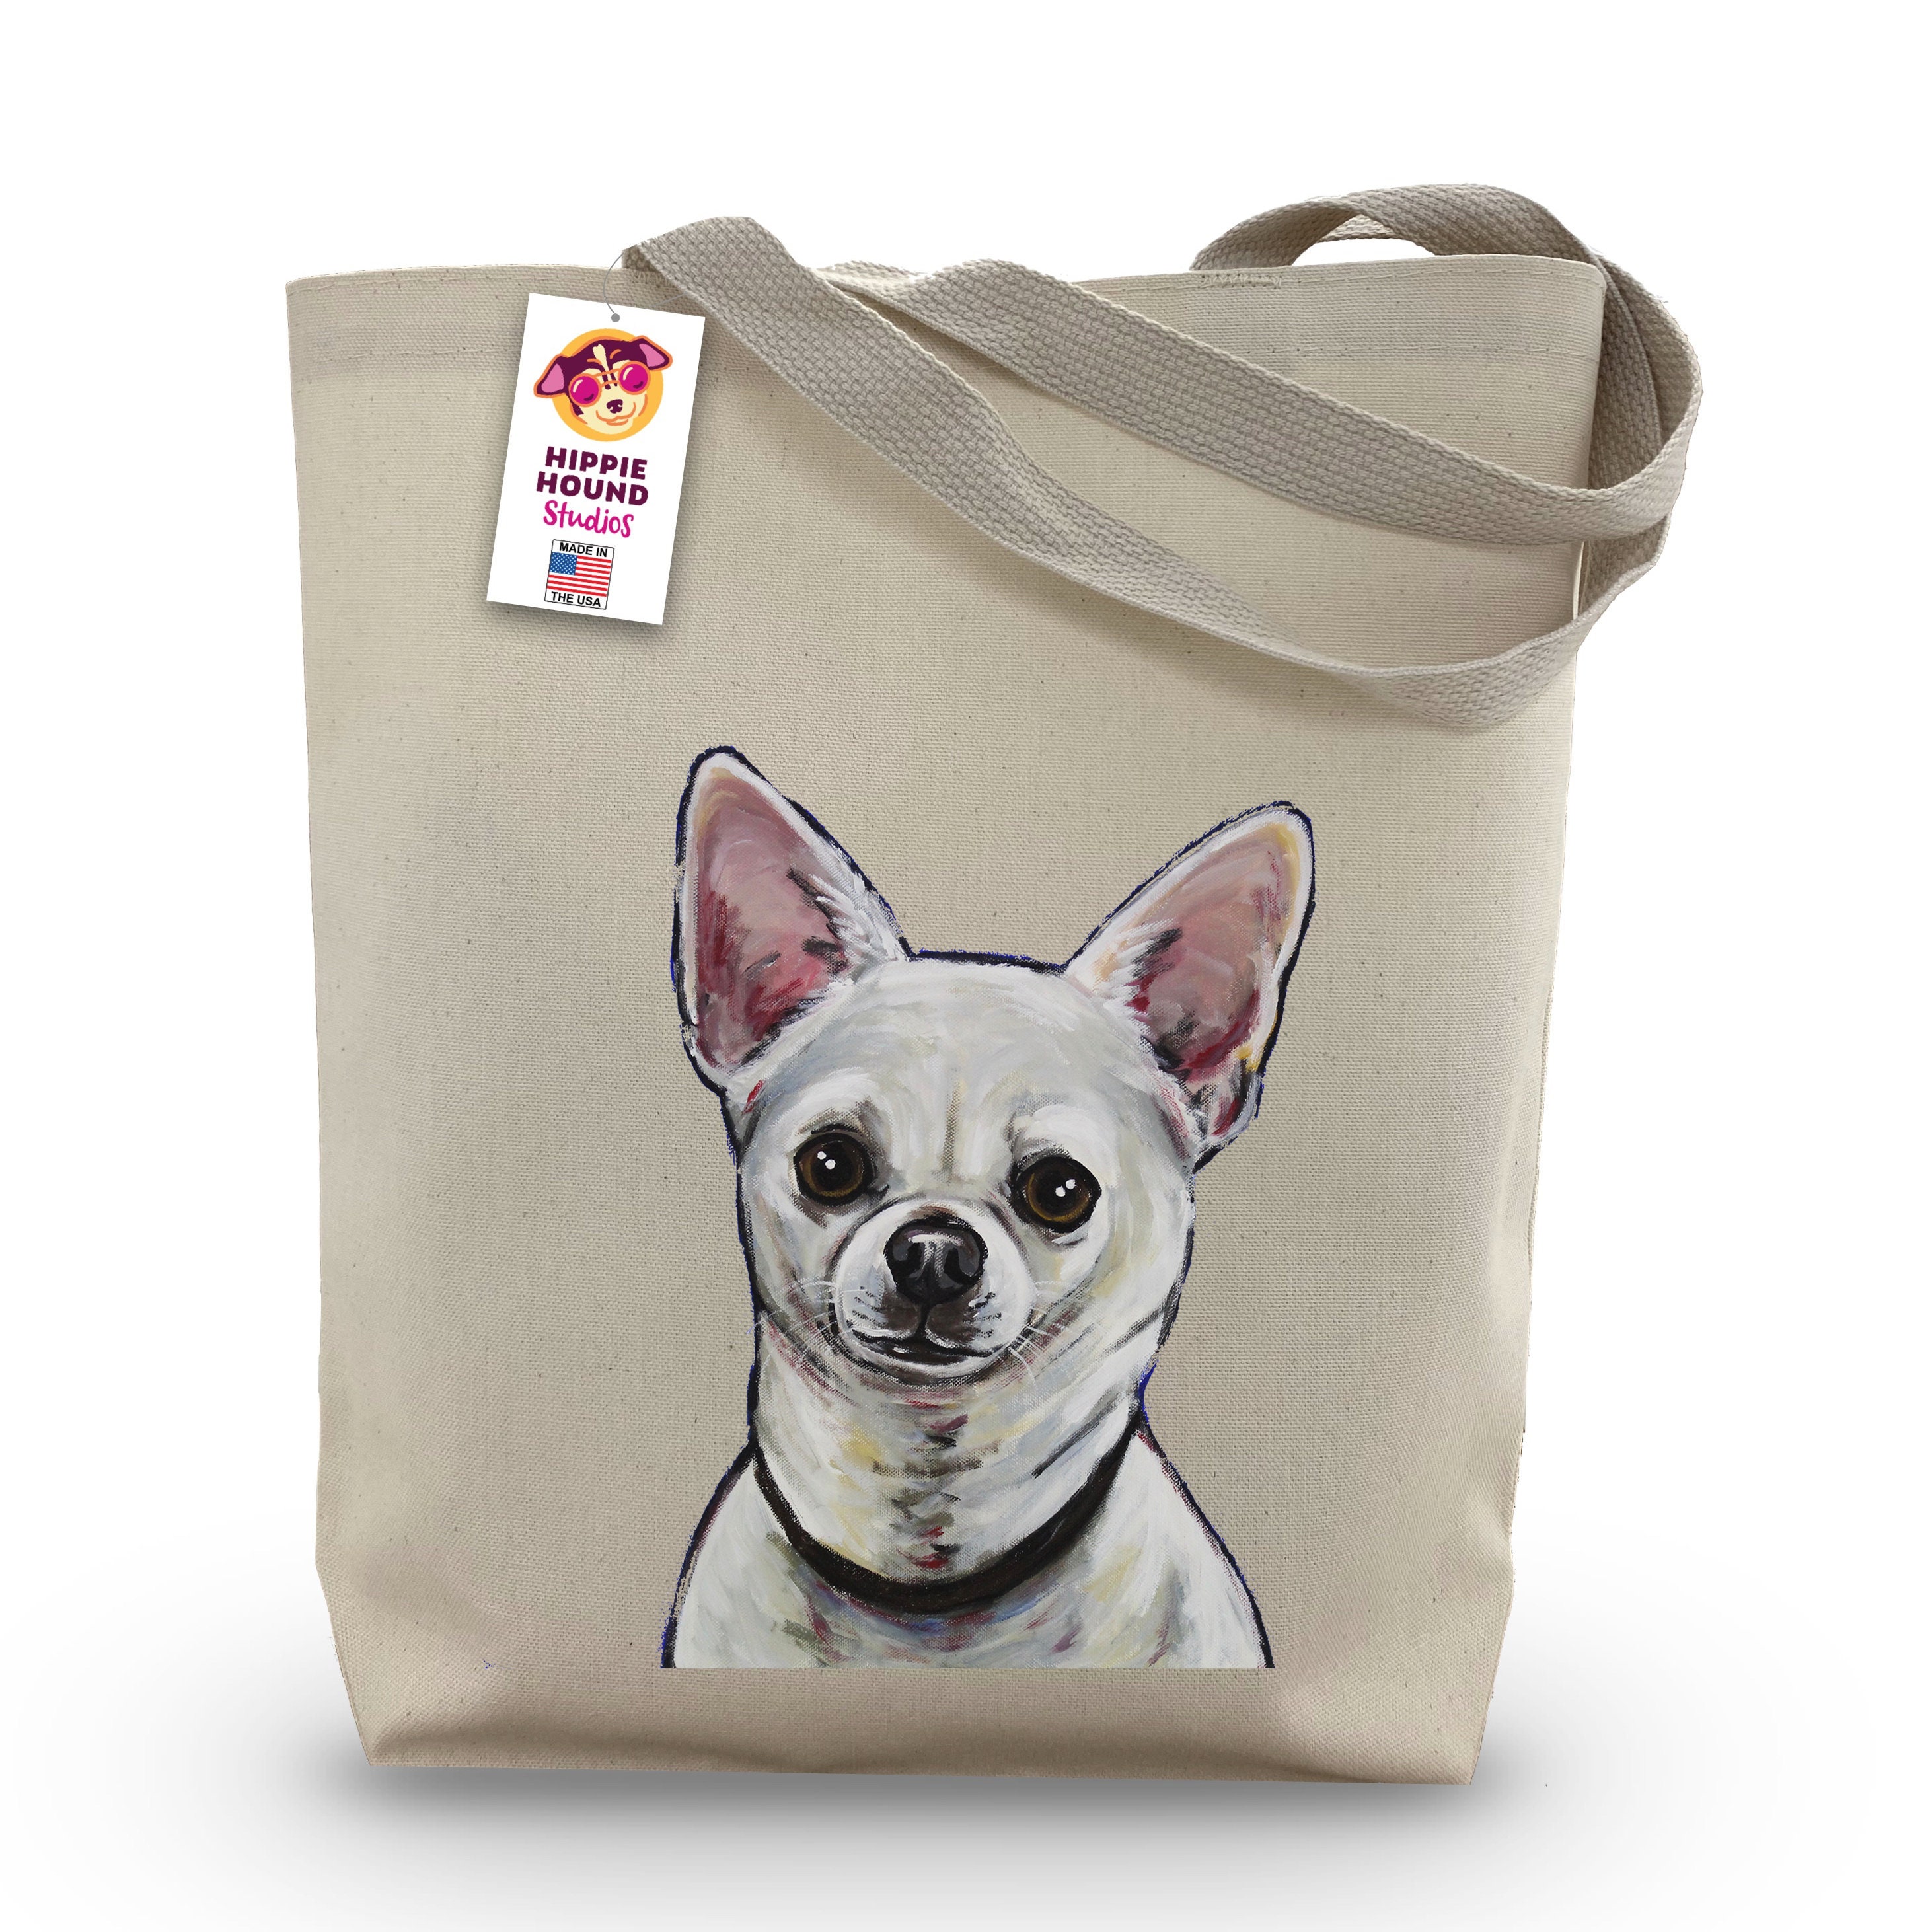  Tan And White Chihuahua Dog Face Tote Bag, 3D Chihuahua Dog  Face Shoulder Bag With Press Stud, Chihuahua Dog Printed Tote Bags For  Chihuahua Lovers Gift, Reusable Shopping Bags Travel Casual